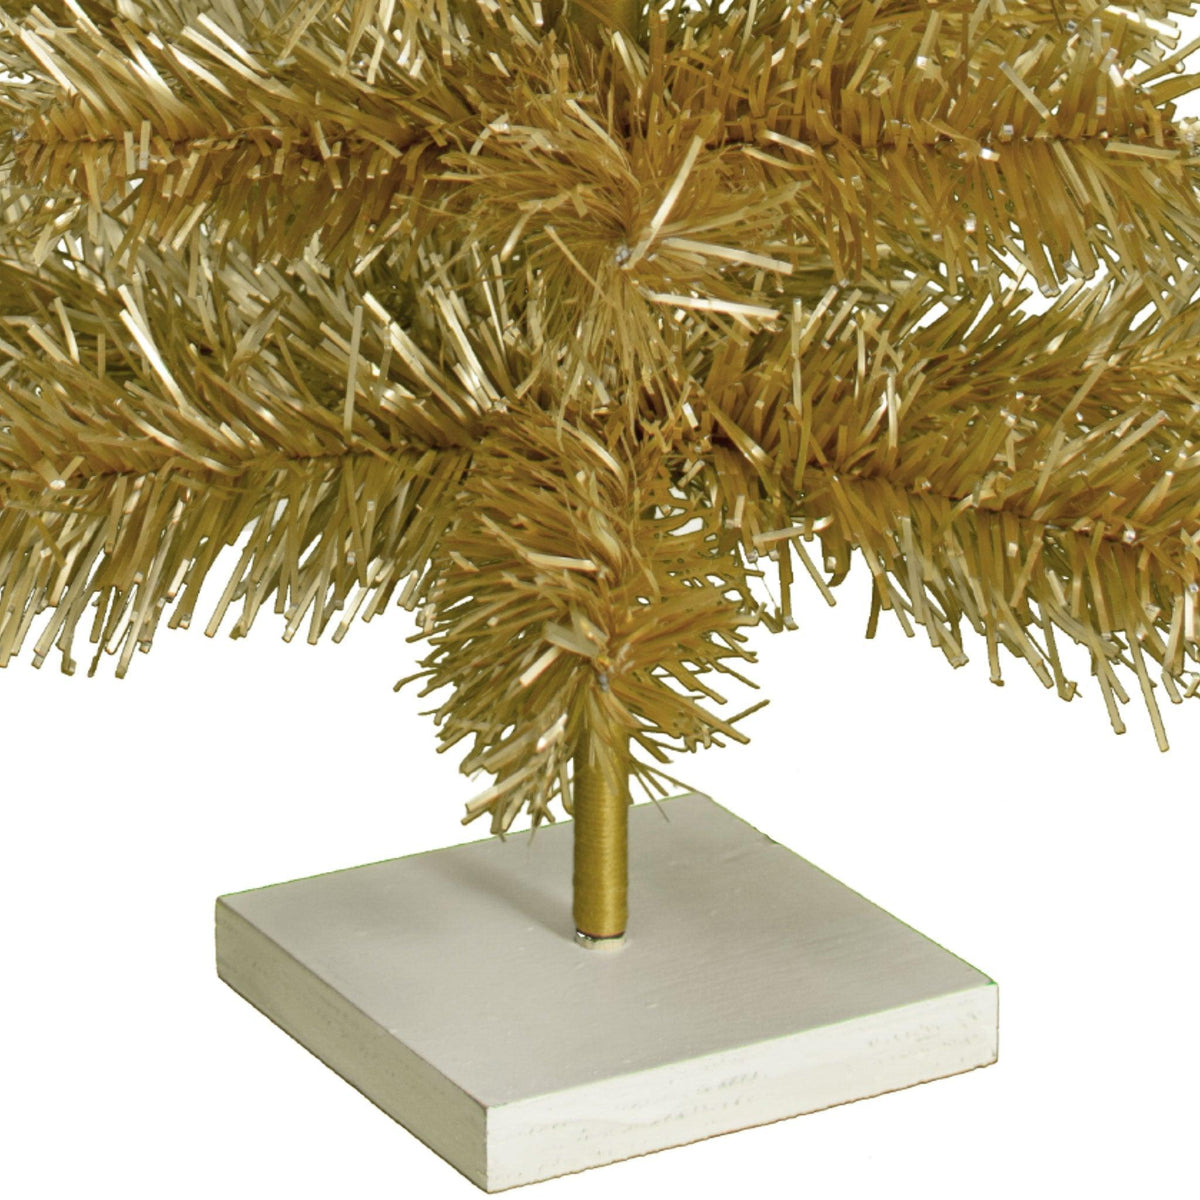 Our 18in Tall Antique Gold Christmas Tree.  Celebrate Lee Display's 120th Anniversary with our brand new Antique Gold colored tinsel Christmas Trees.  Shop for antique gold christmas trees at leedisplay.com